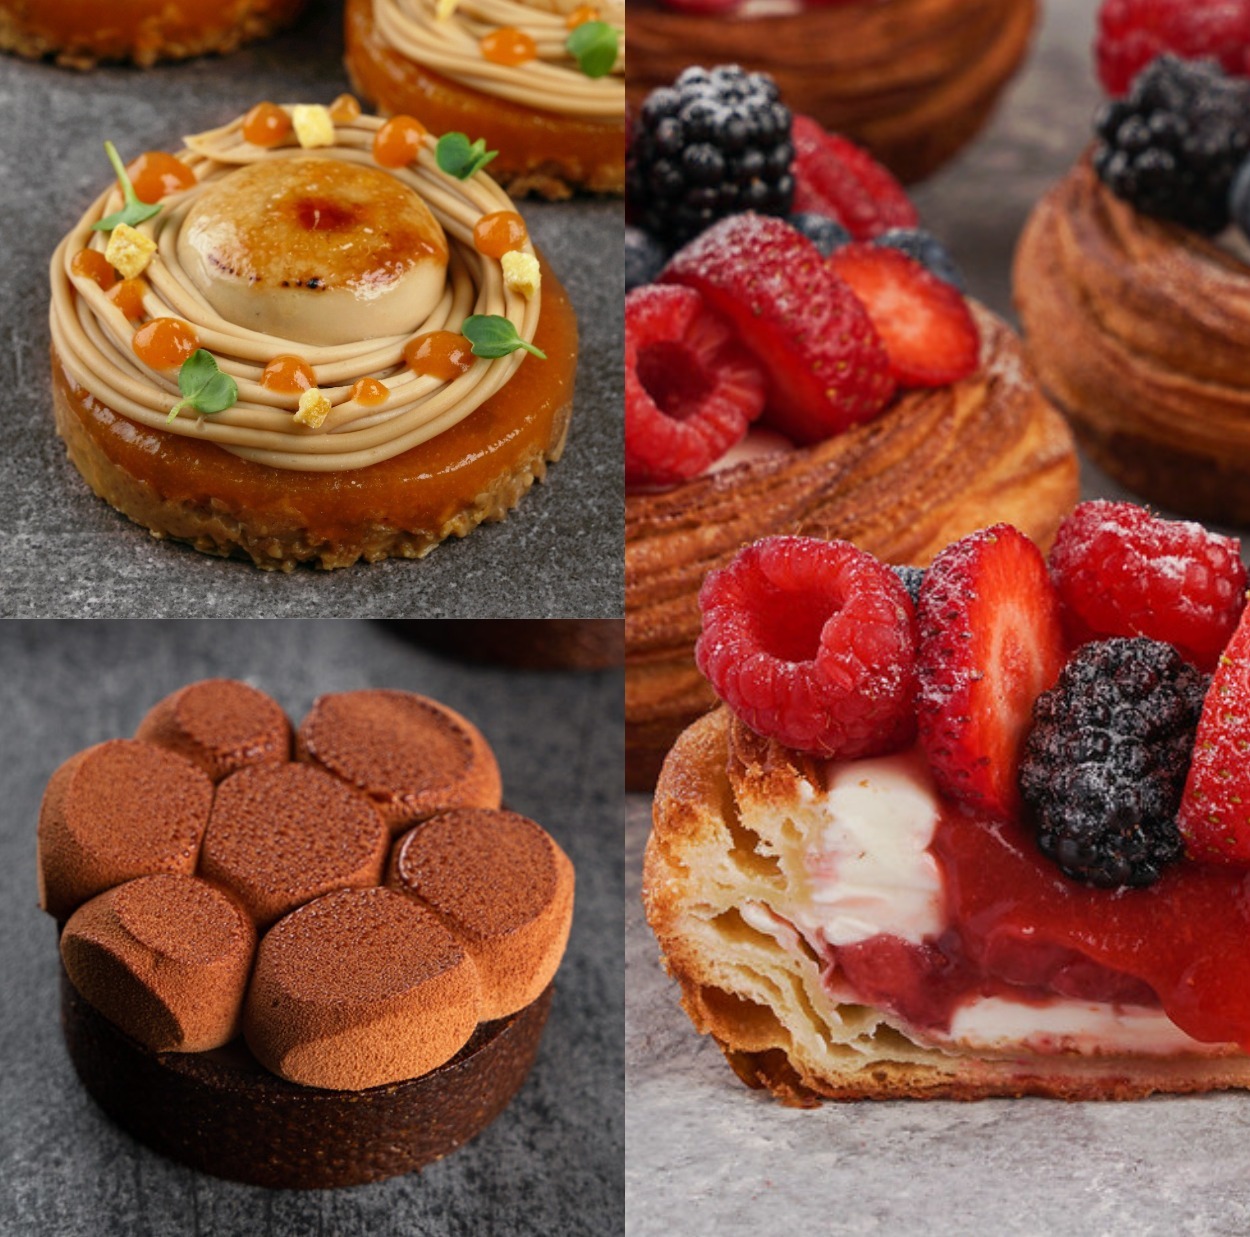 THE BEST TARTS BY ANTONIO BACHOUR COURSE